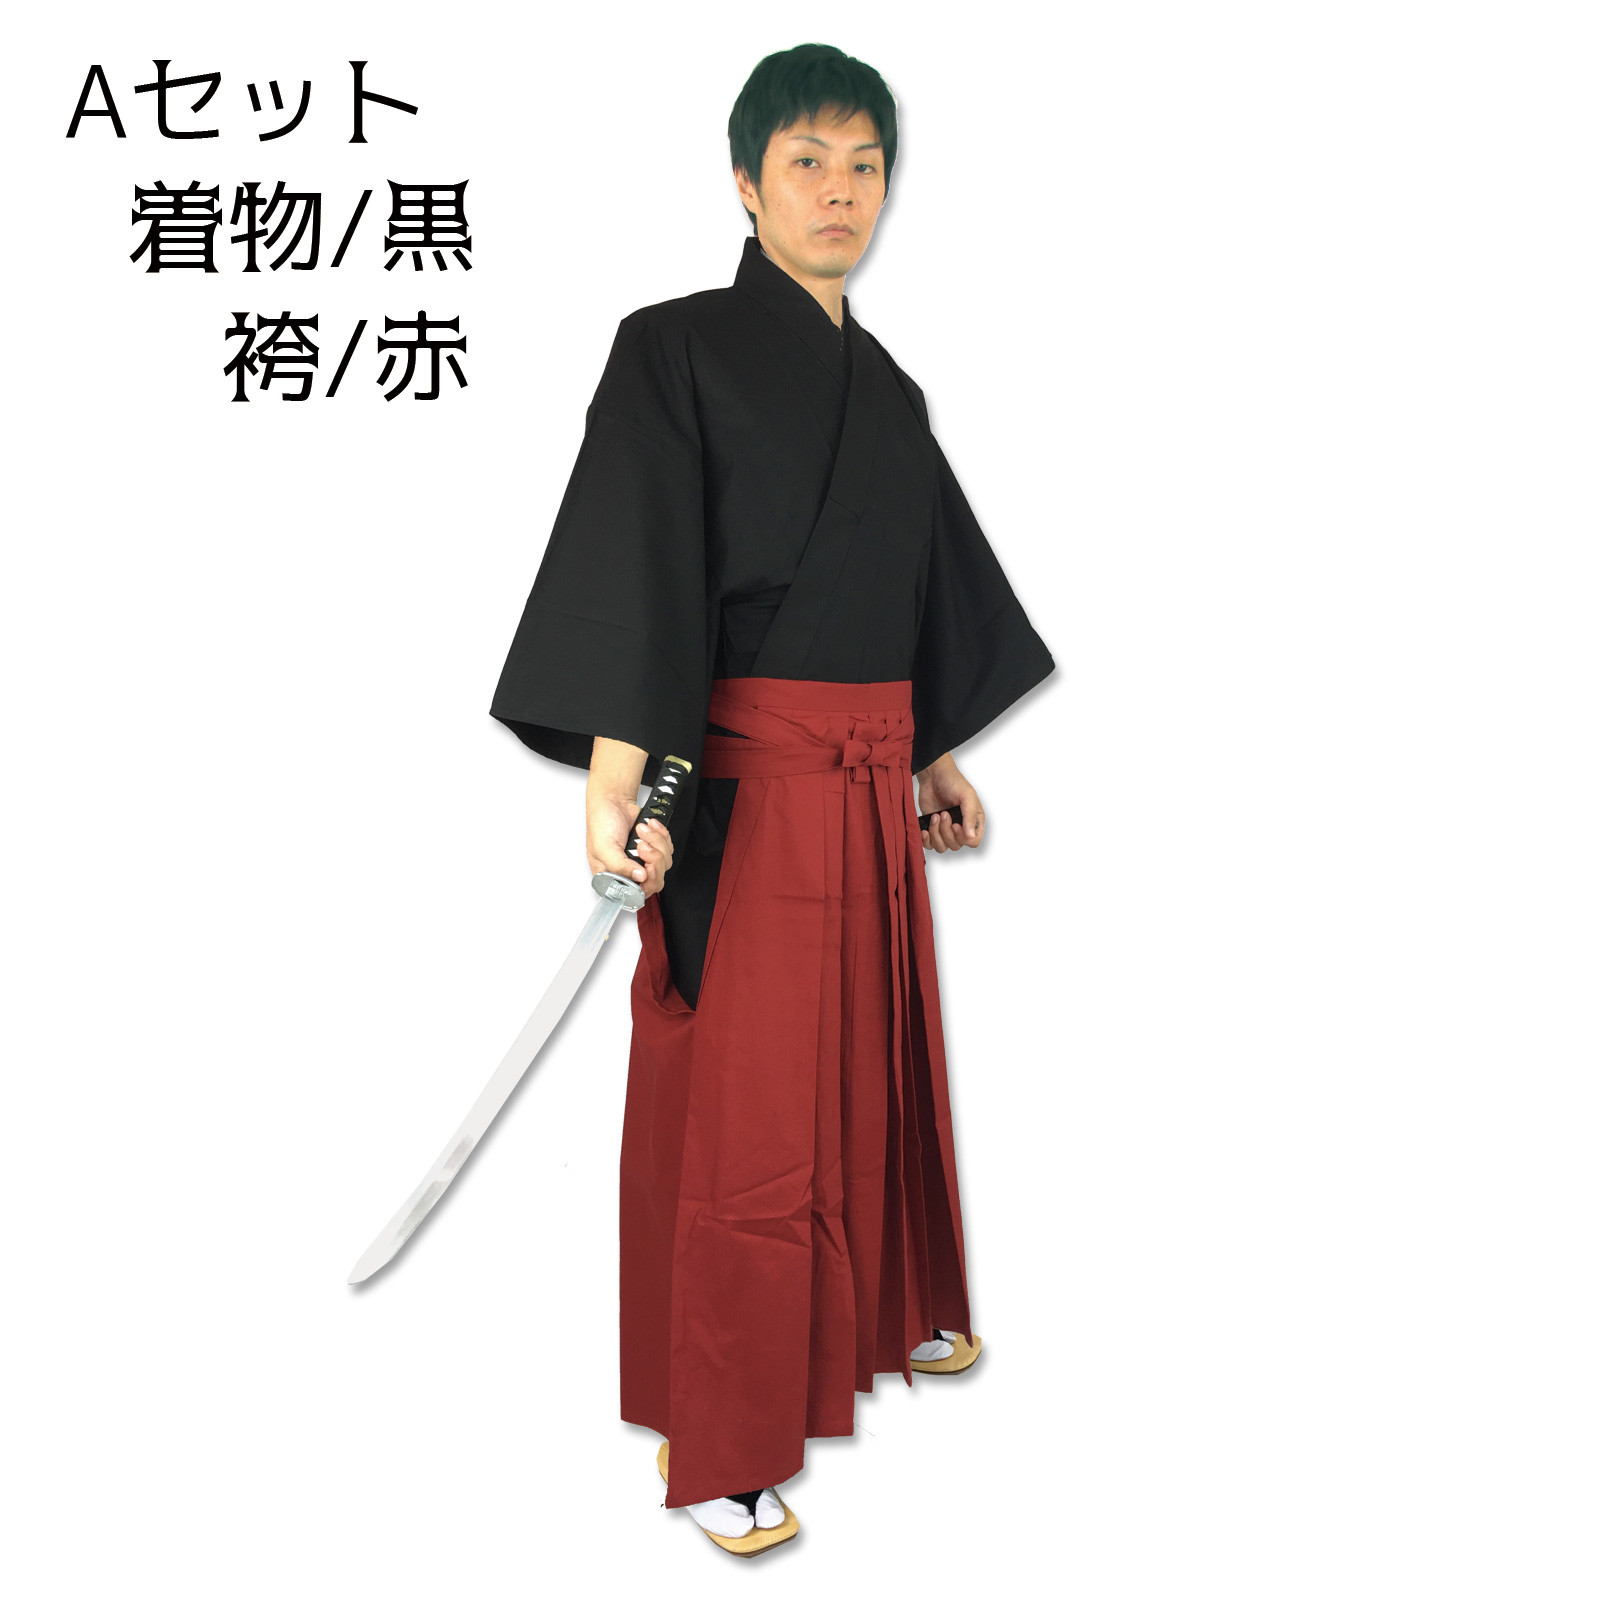 Costume Samurai Set Ll Import Japanese Products At Wholesale Prices Super Delivery